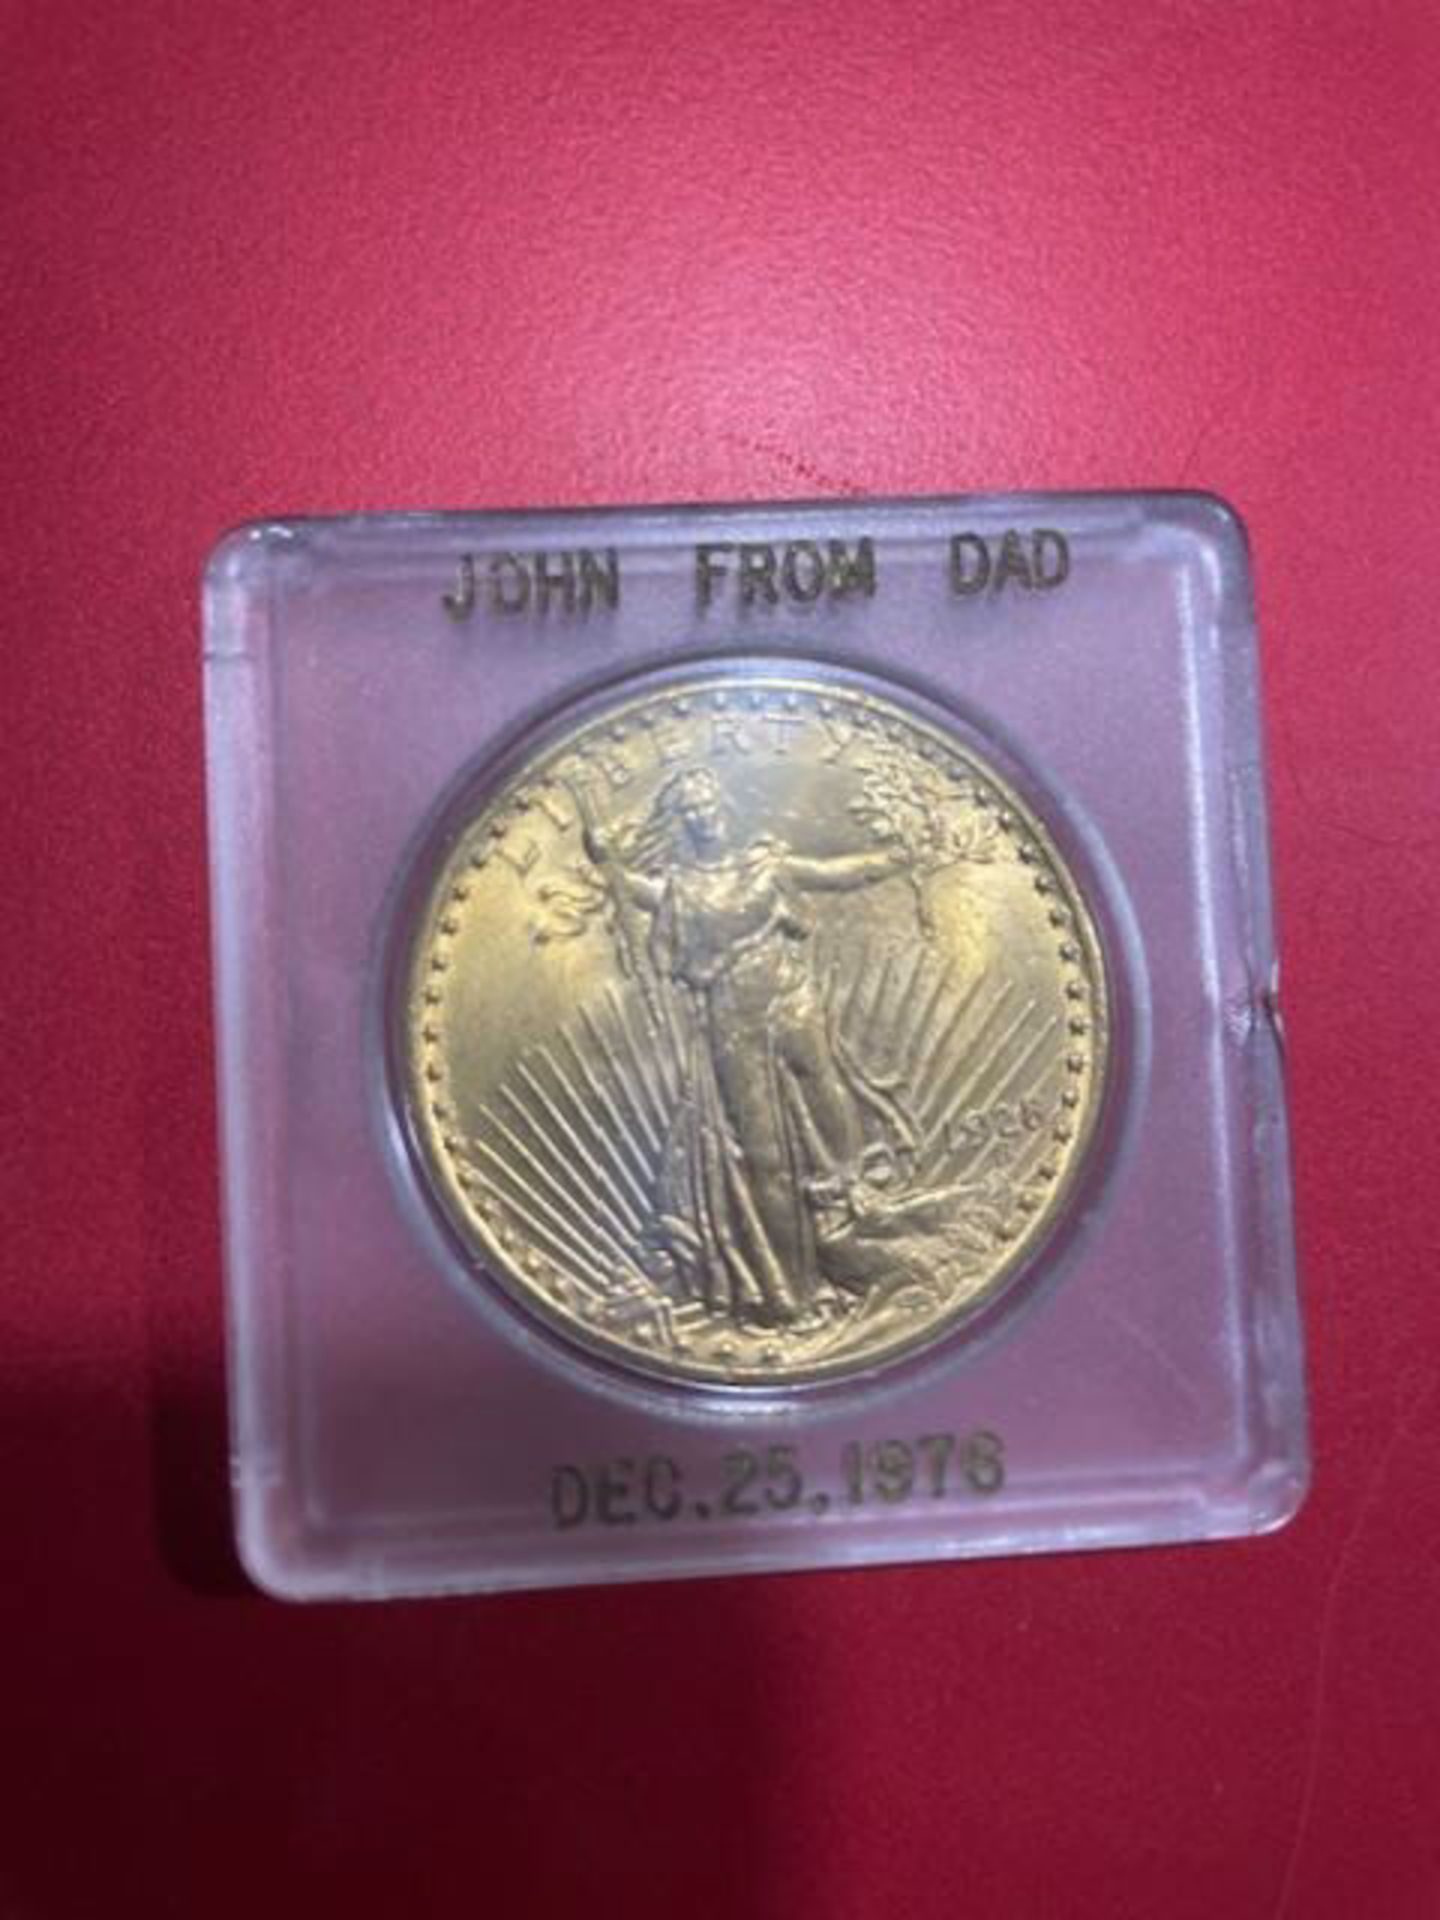 1928 St. Gaudens Double Eagle $20 Gold Coin - Image 8 of 12